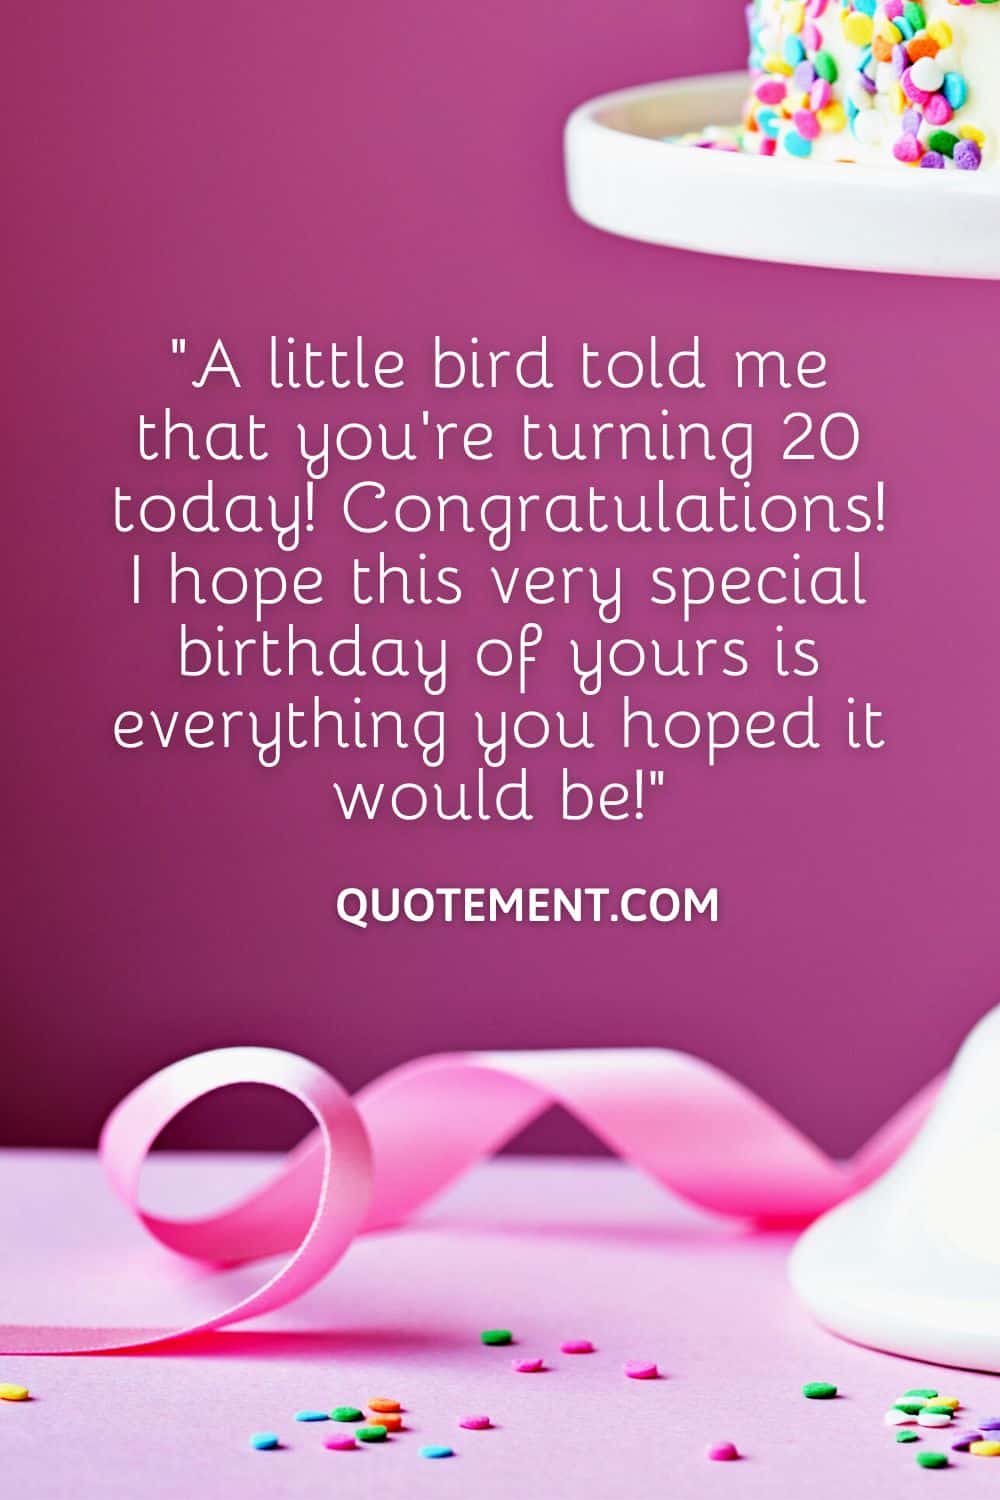 A little bird told me that you’re turning 20 today